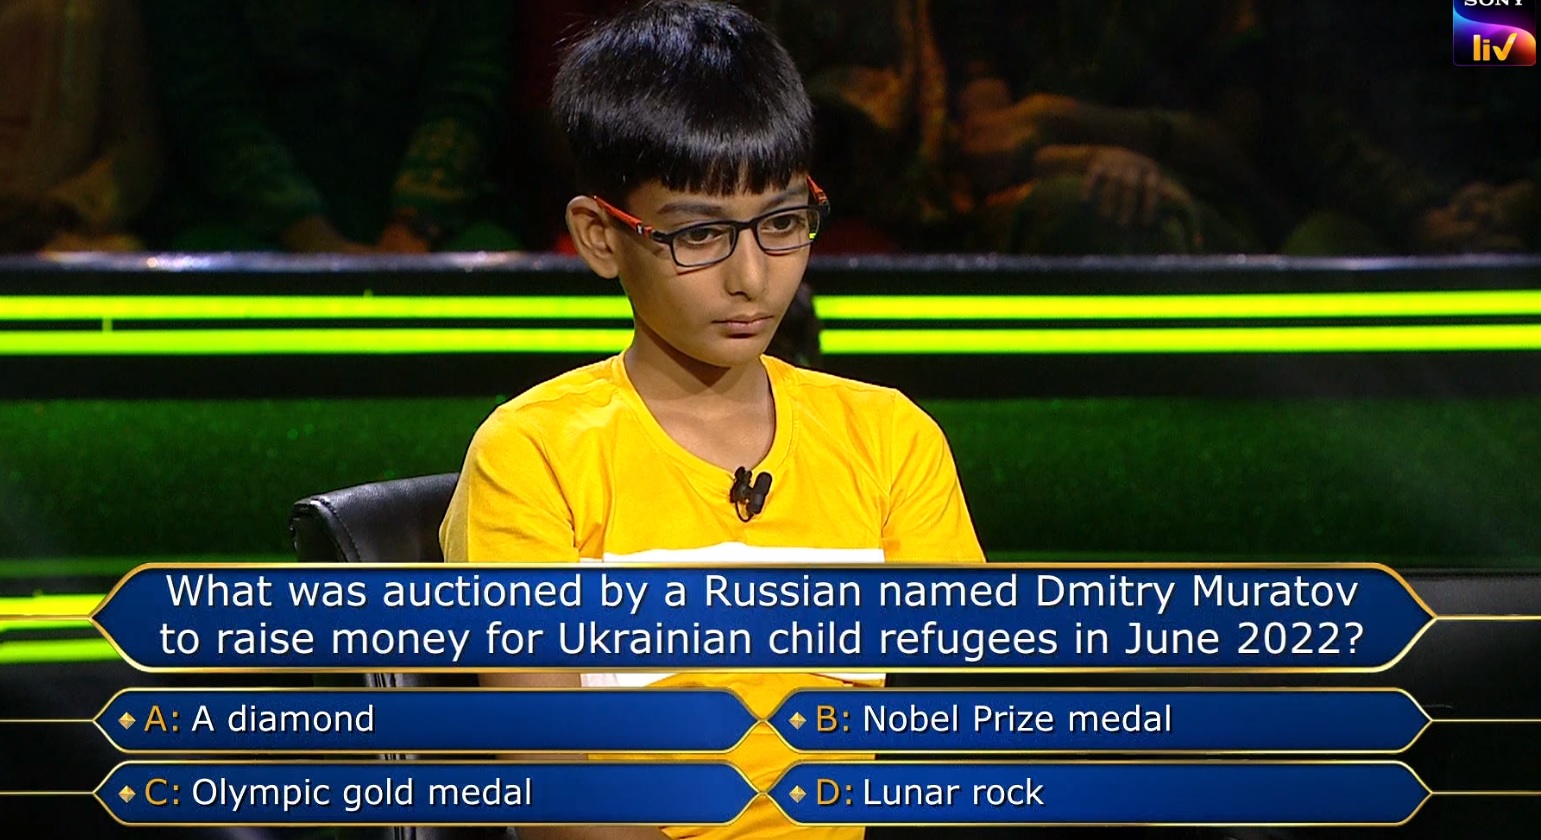 Ques : What was auctioned by a Russian named Dmitry Muratov to raise money for Ukrainian child refugees in June 2022?